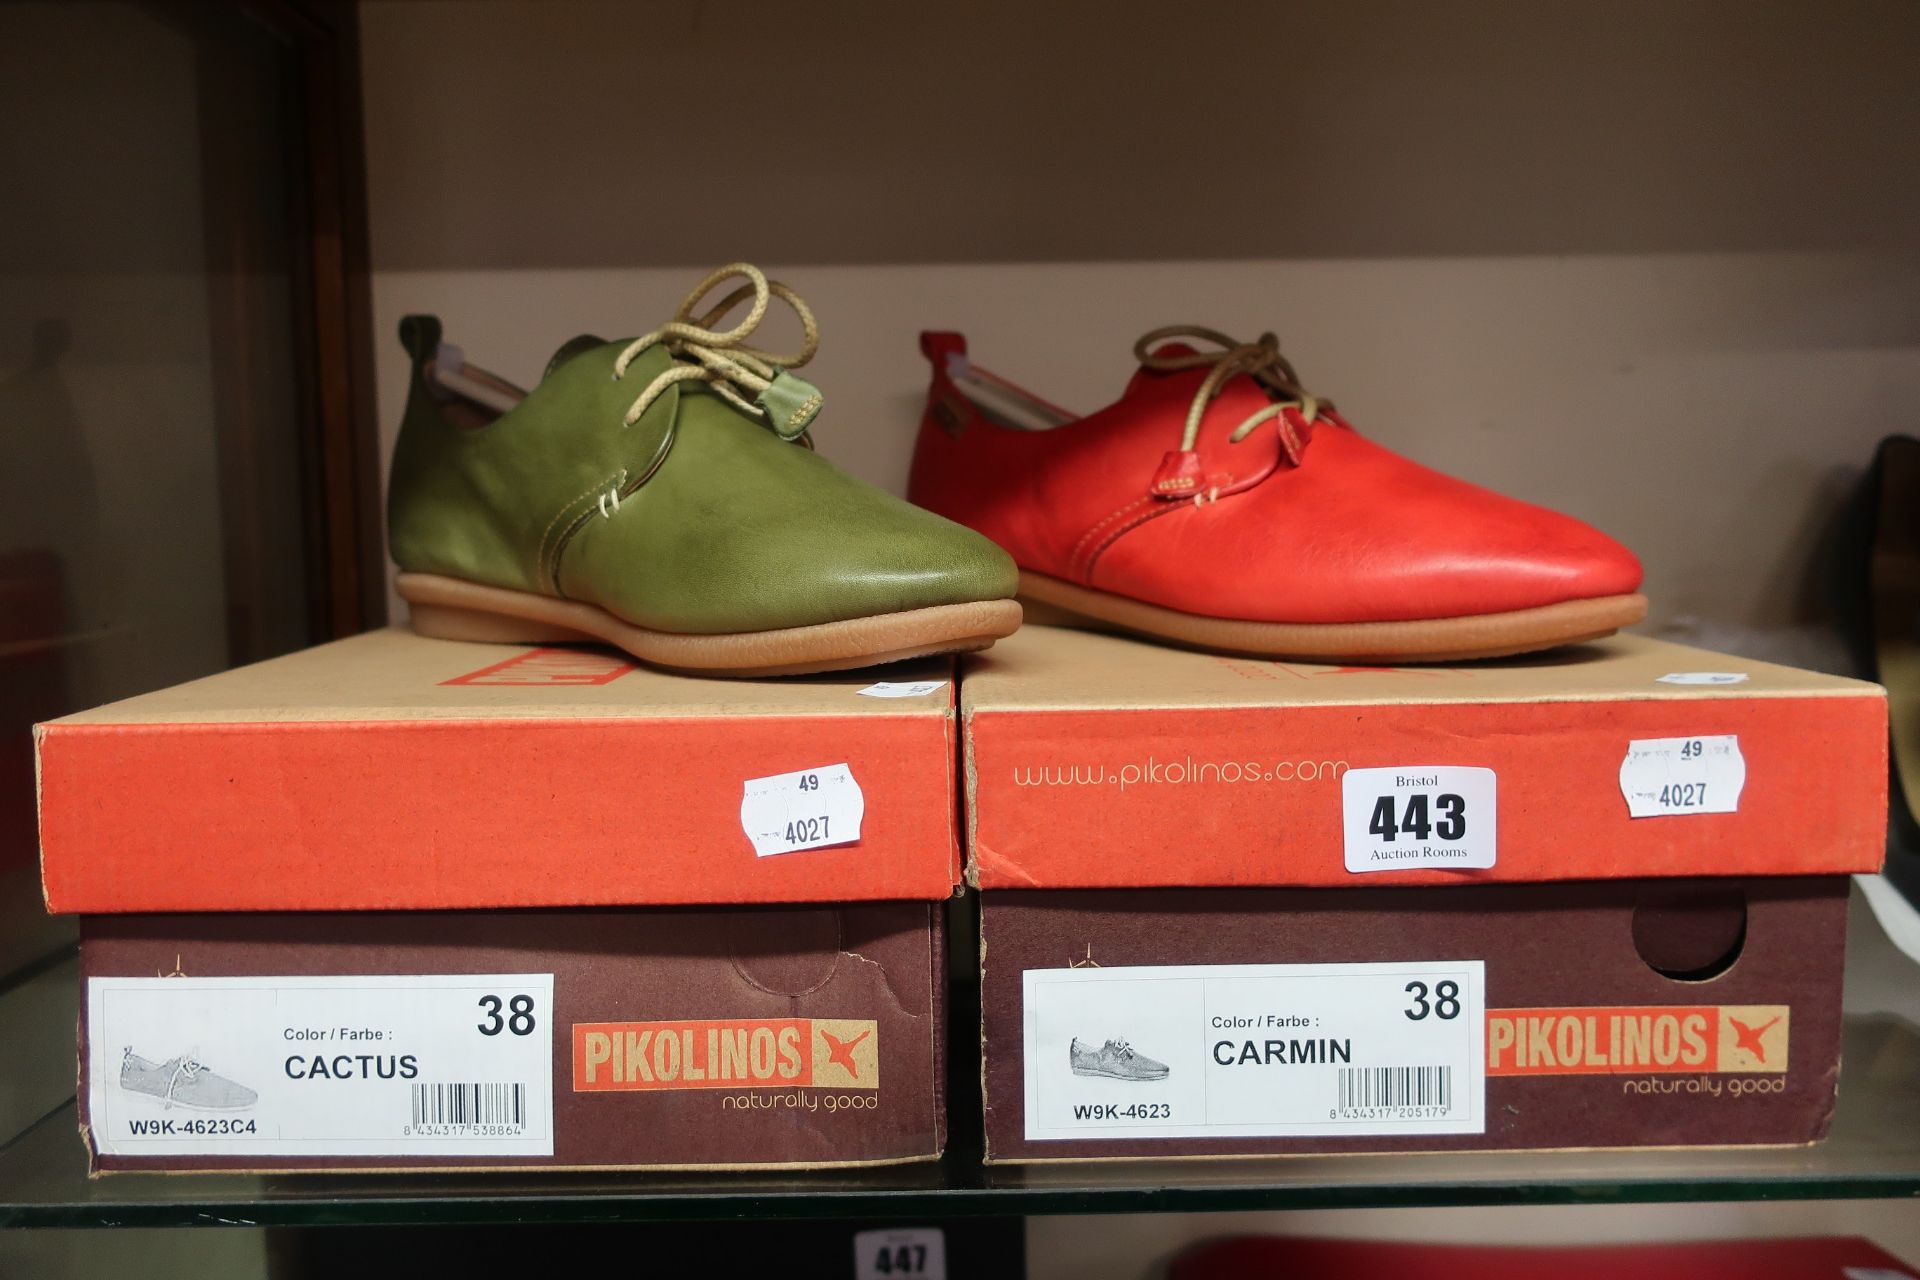 Two pairs of as new Pikolinos W9K-4623 shoes, one pair in cactus, one pair in carmin (Both EU 38).